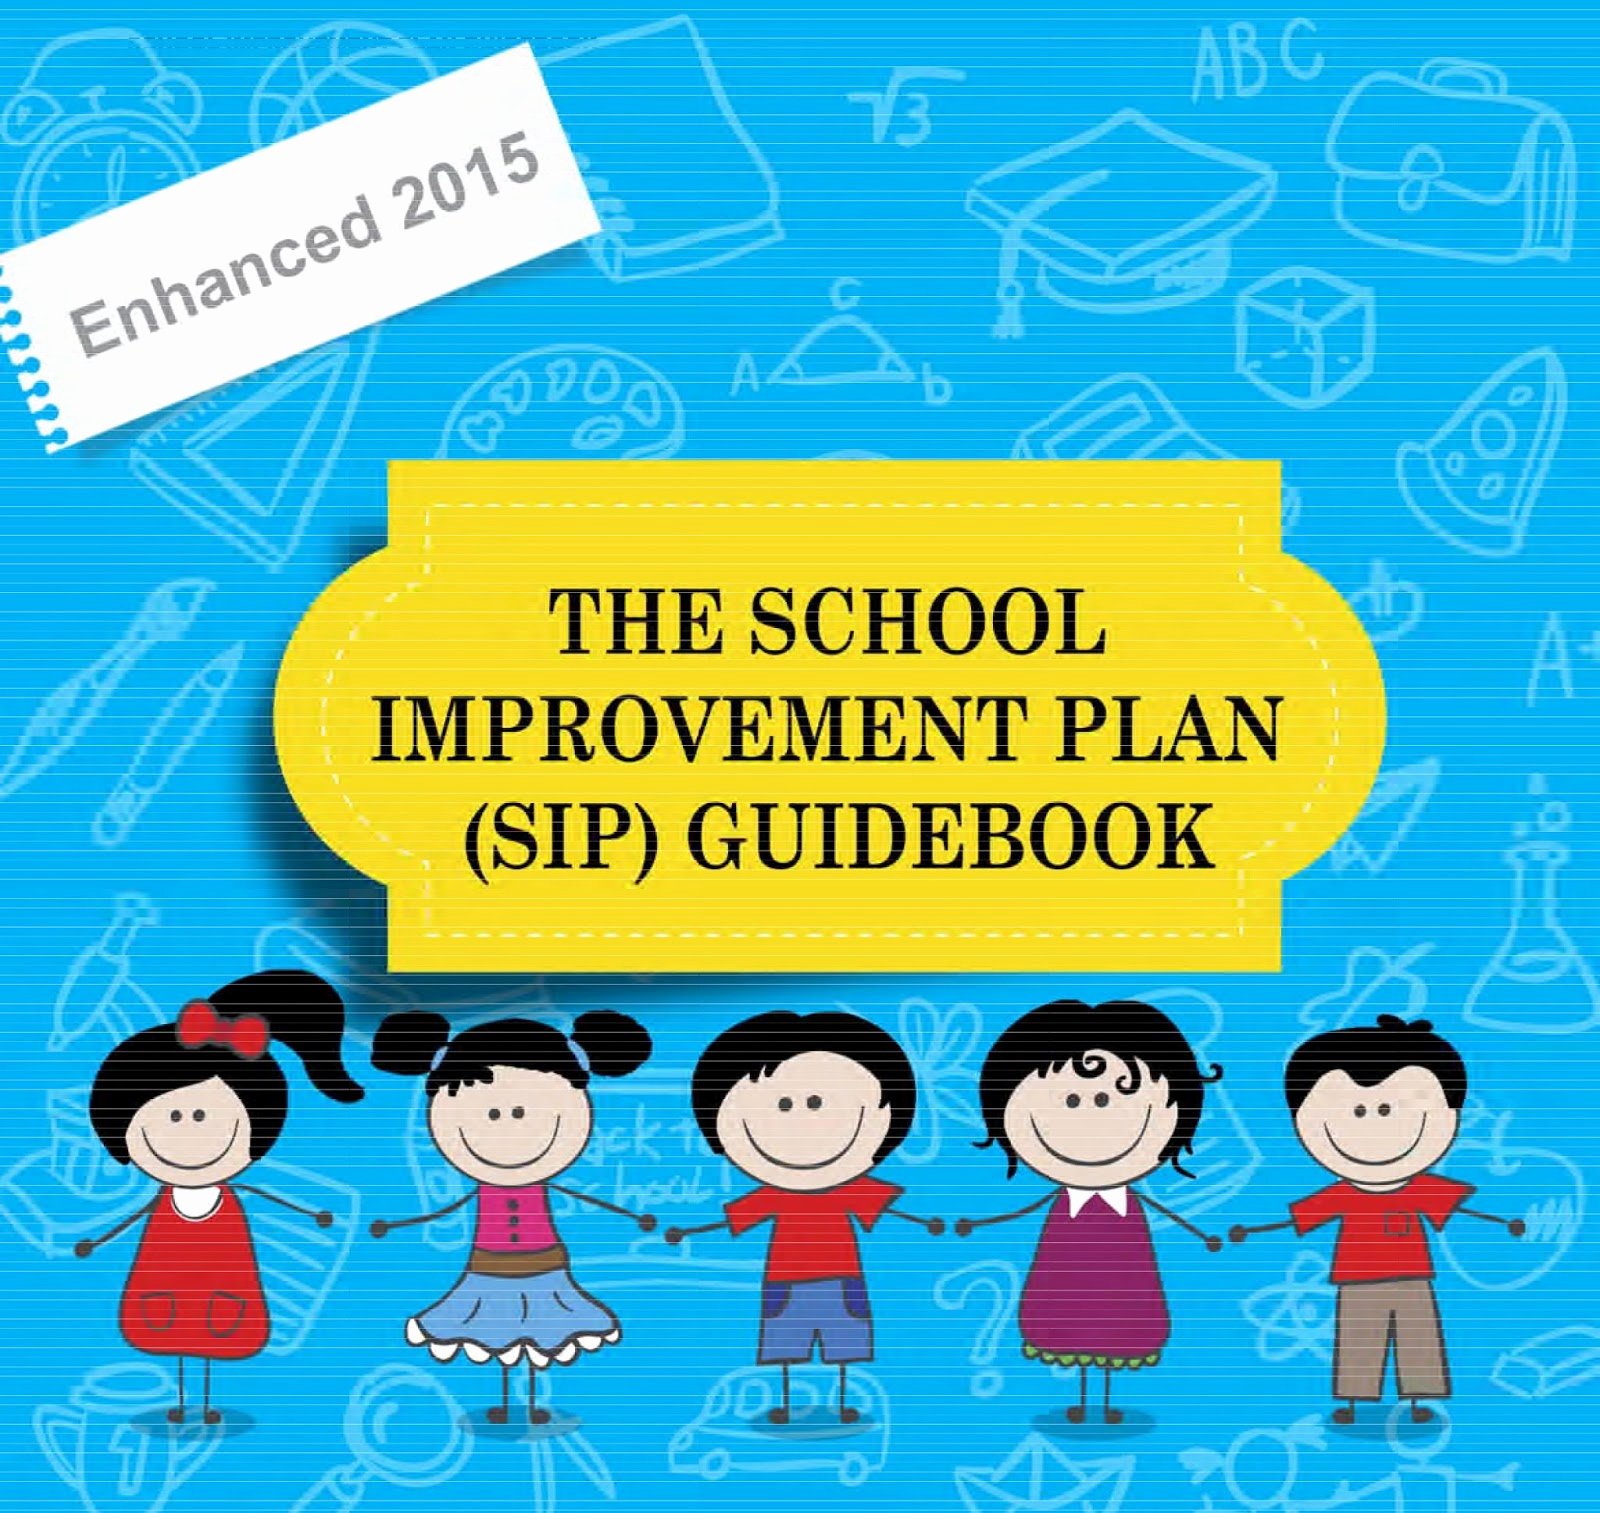 School Improvement Planning Templates New Sample Of Enhanced School Improvement Planning Sip Process and the School Report Card Src